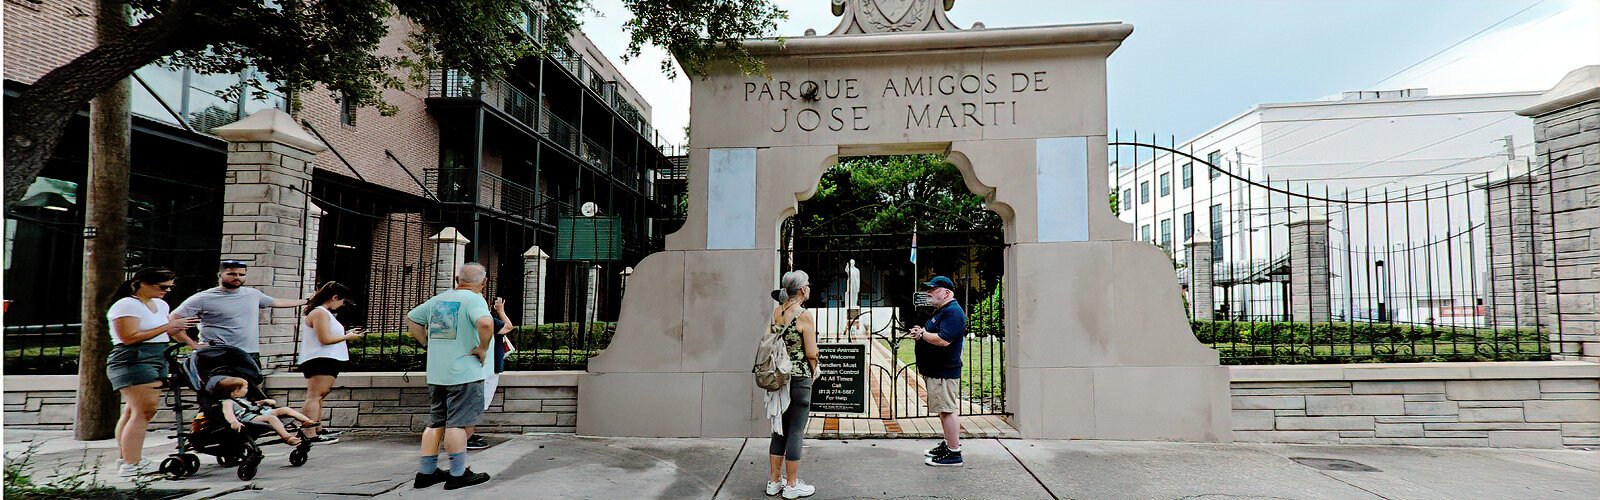 The locked gate at the Park of Jose Marti’s Friends prevented participants from walking on Cuban soil. This tiny park on Eighth Avenue is dedicated to Cuban leader Jose Marti and was gifted to the Republic of Cuba in 1956.